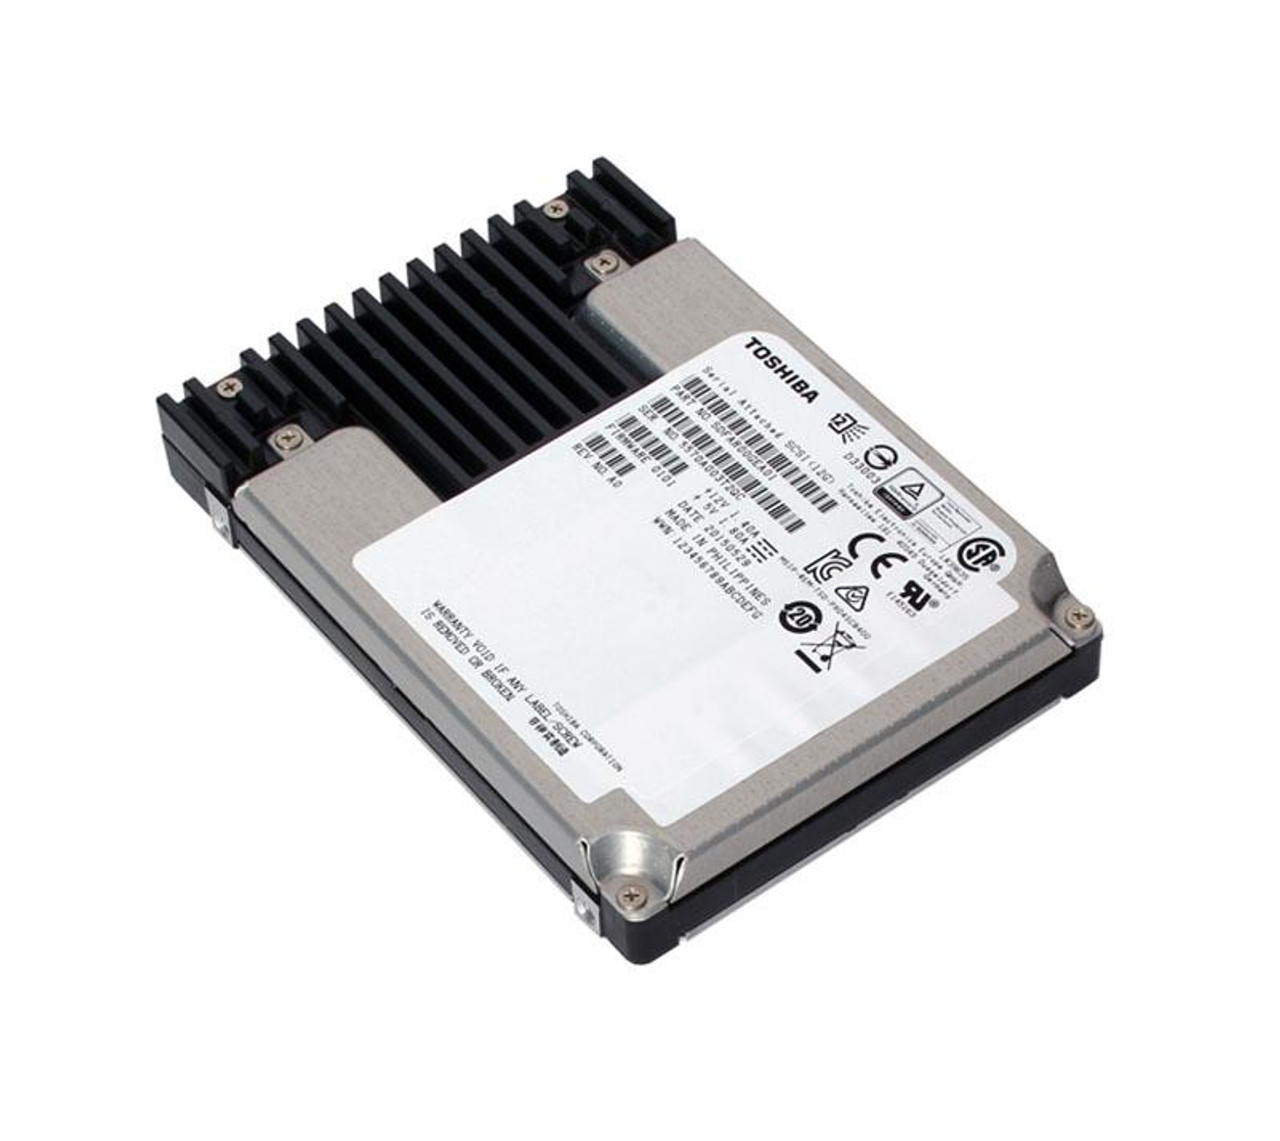 PX05SVQ192B Toshiba Enterprise 1.92TB MLC SAS 12Gbps Mixed Use (SED FIPS 140-2 / PLP) 2.5-inch Internal Solid State Drive (SSD)